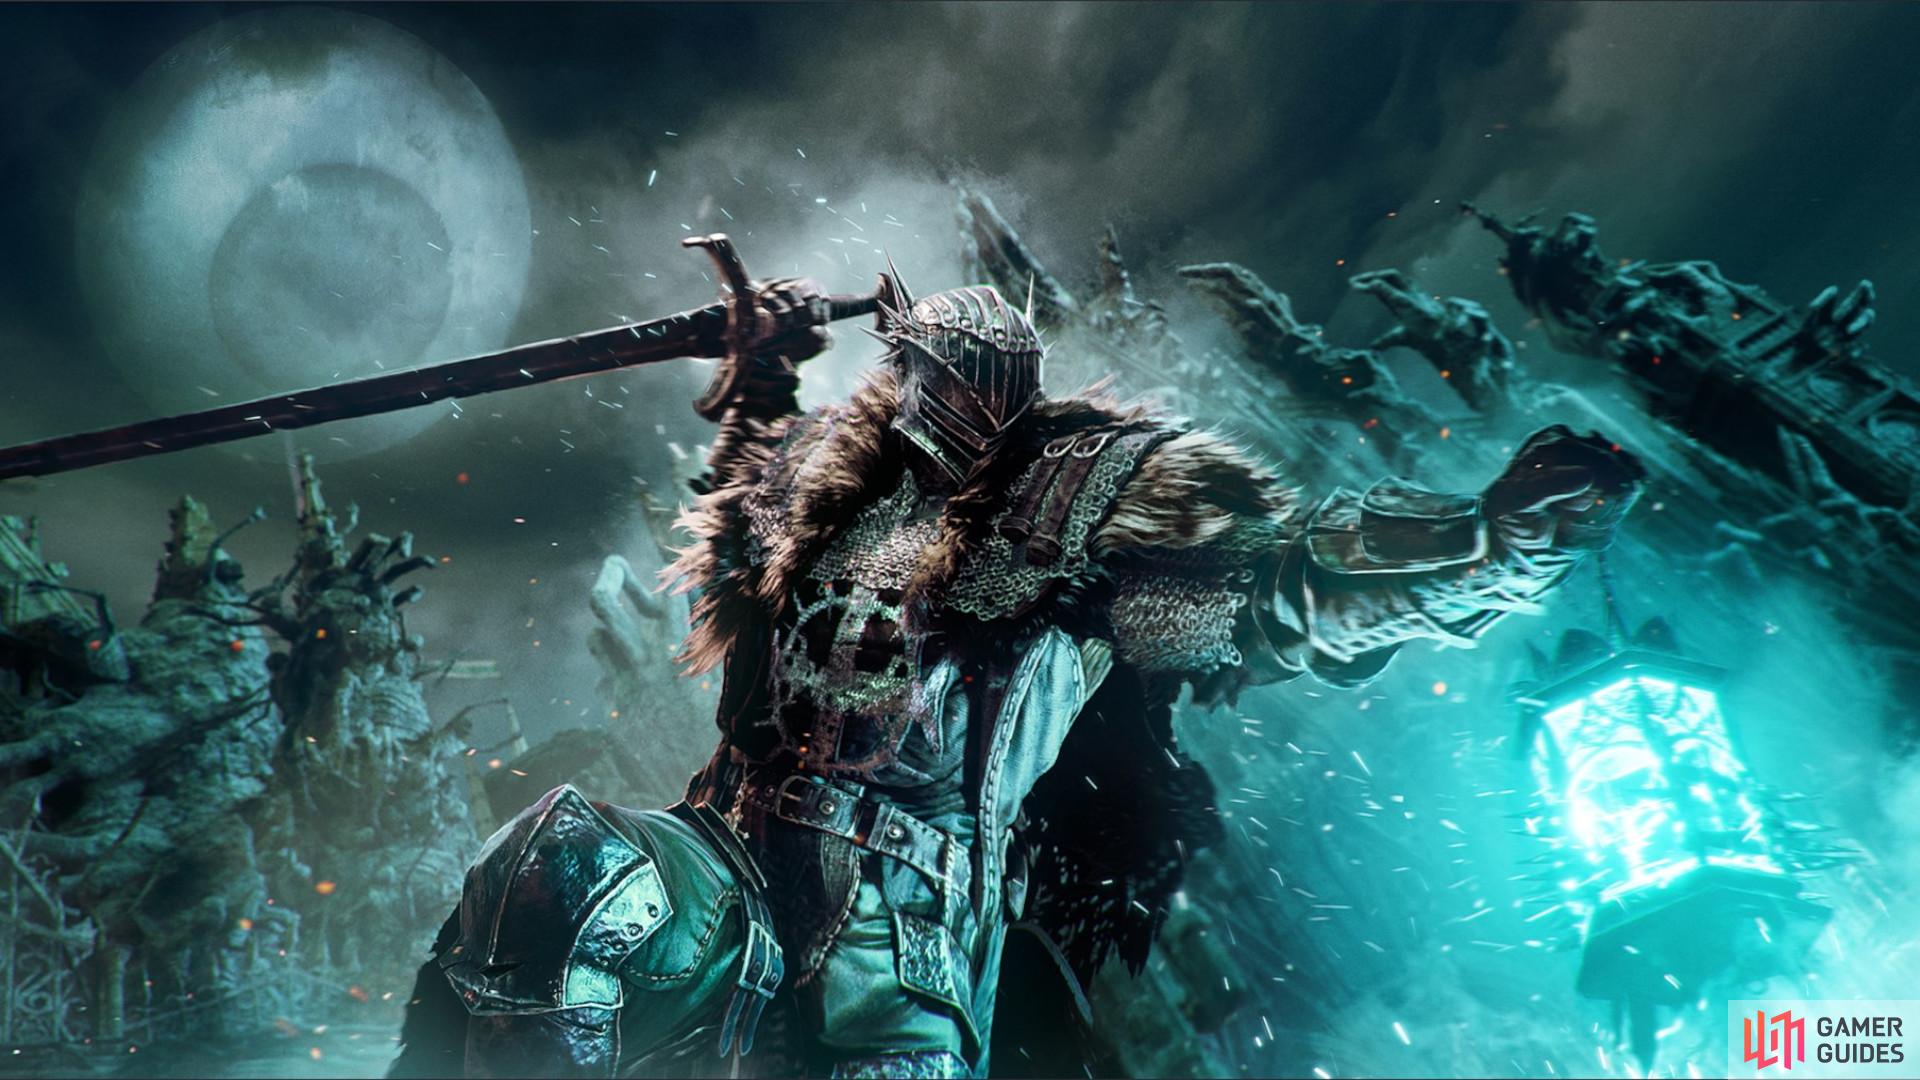 A guide to all NPC Quests in Lords of the Fallen, with key locations and objectives for them all. Image via CI Games / Hexworks.